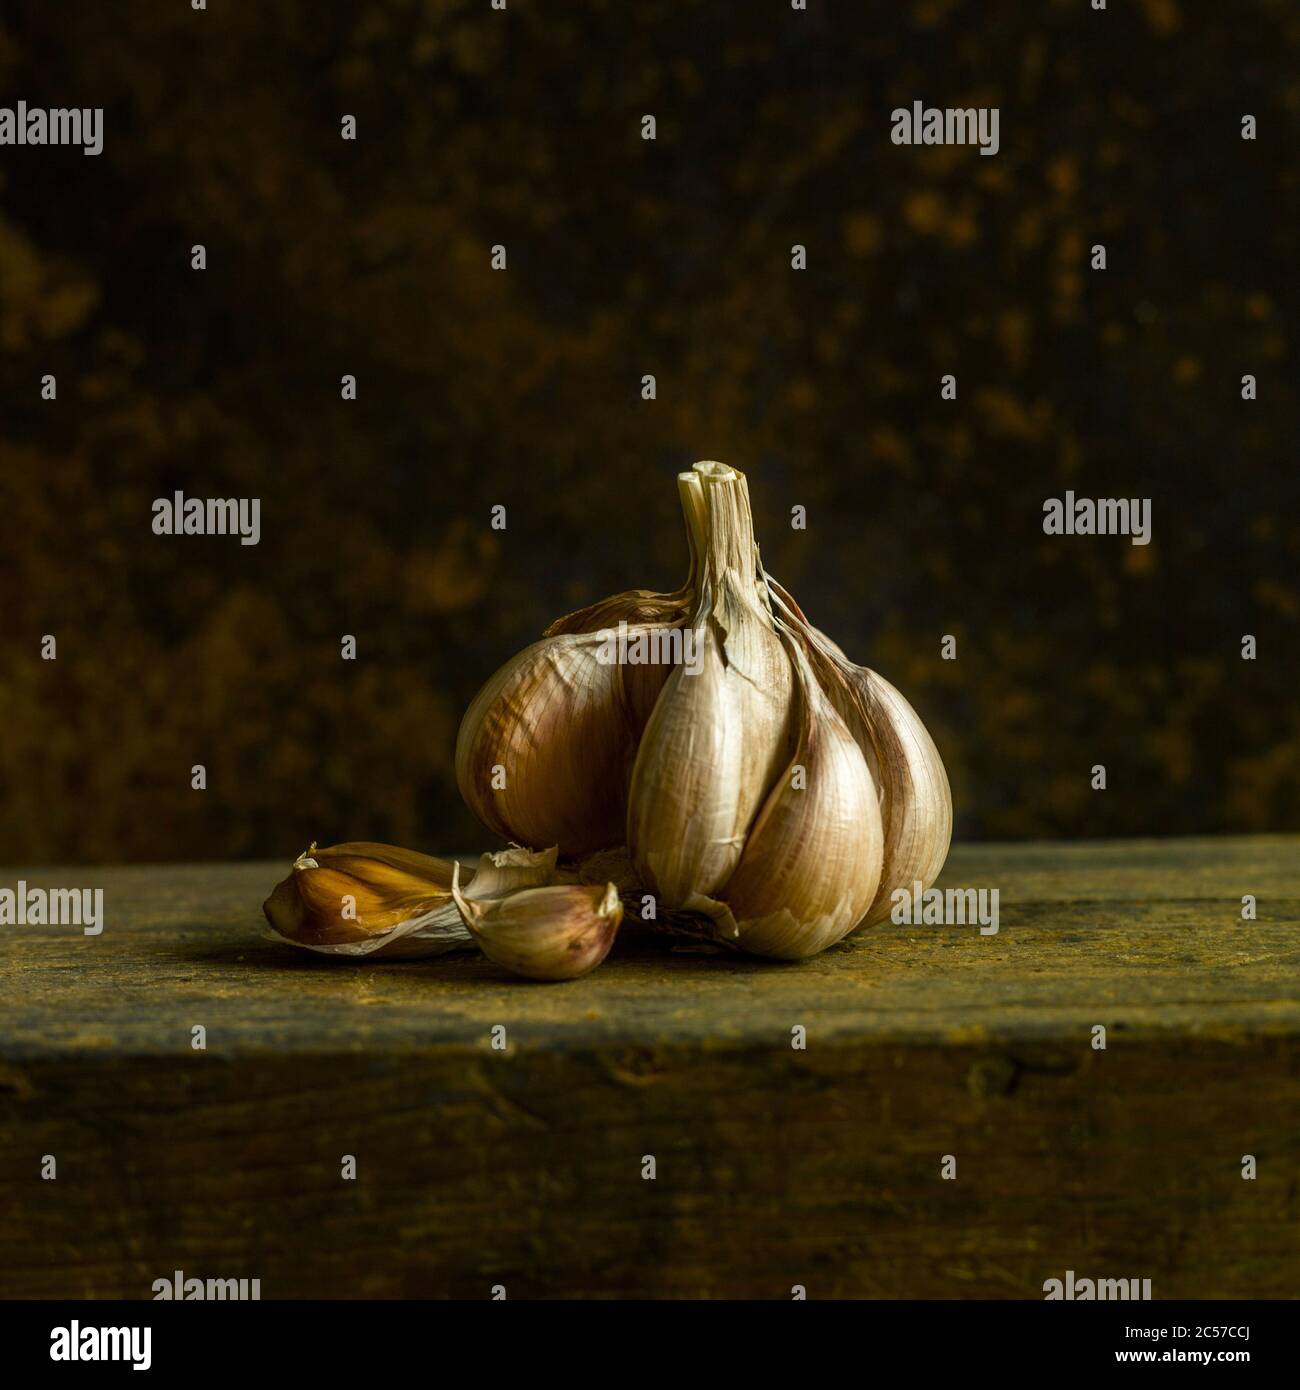 Closeup shot of garlic on the wooden table Stock Photo